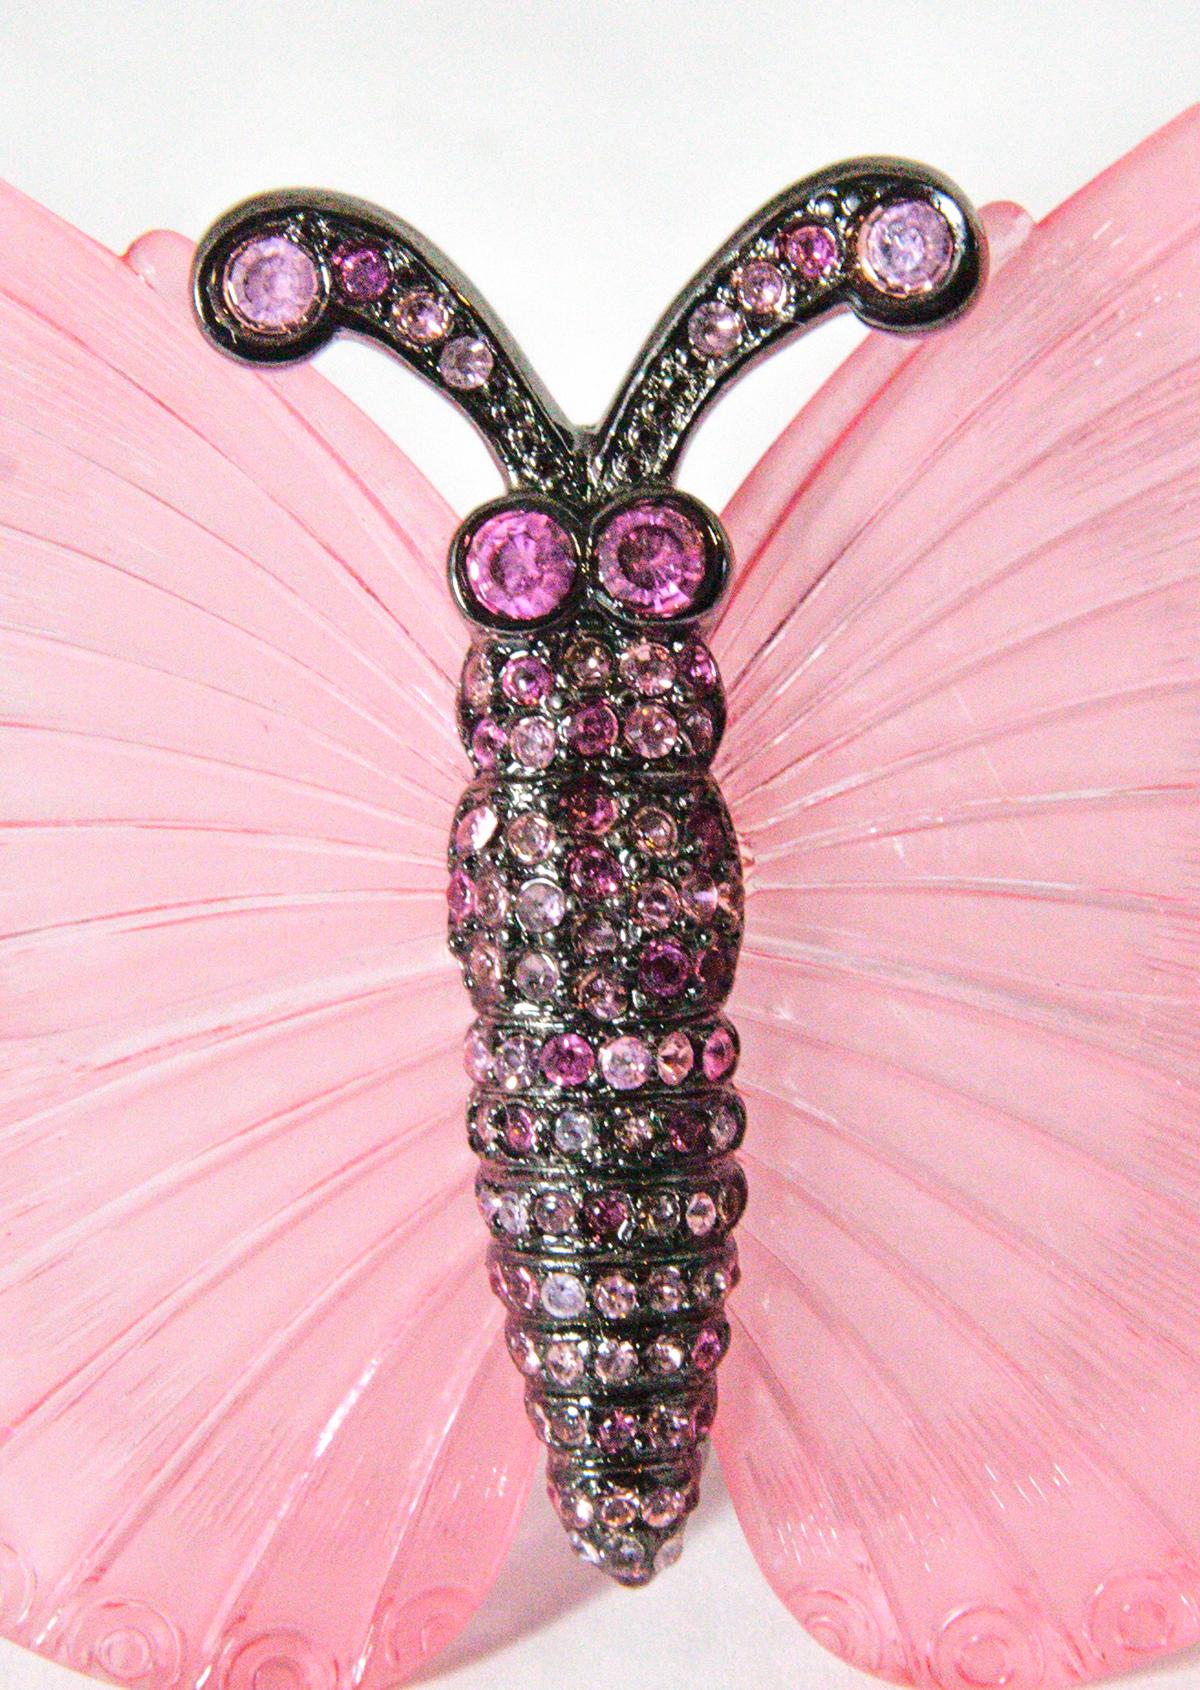 This signed Kenneth J. Lane brooch has a highly etched pink resin butterfly design with pink rhinestones in a Japanned setting. This piece has come back to the line after its successful debut in the late “60’s measures 3-1/4” x 2-1/2” and is signed